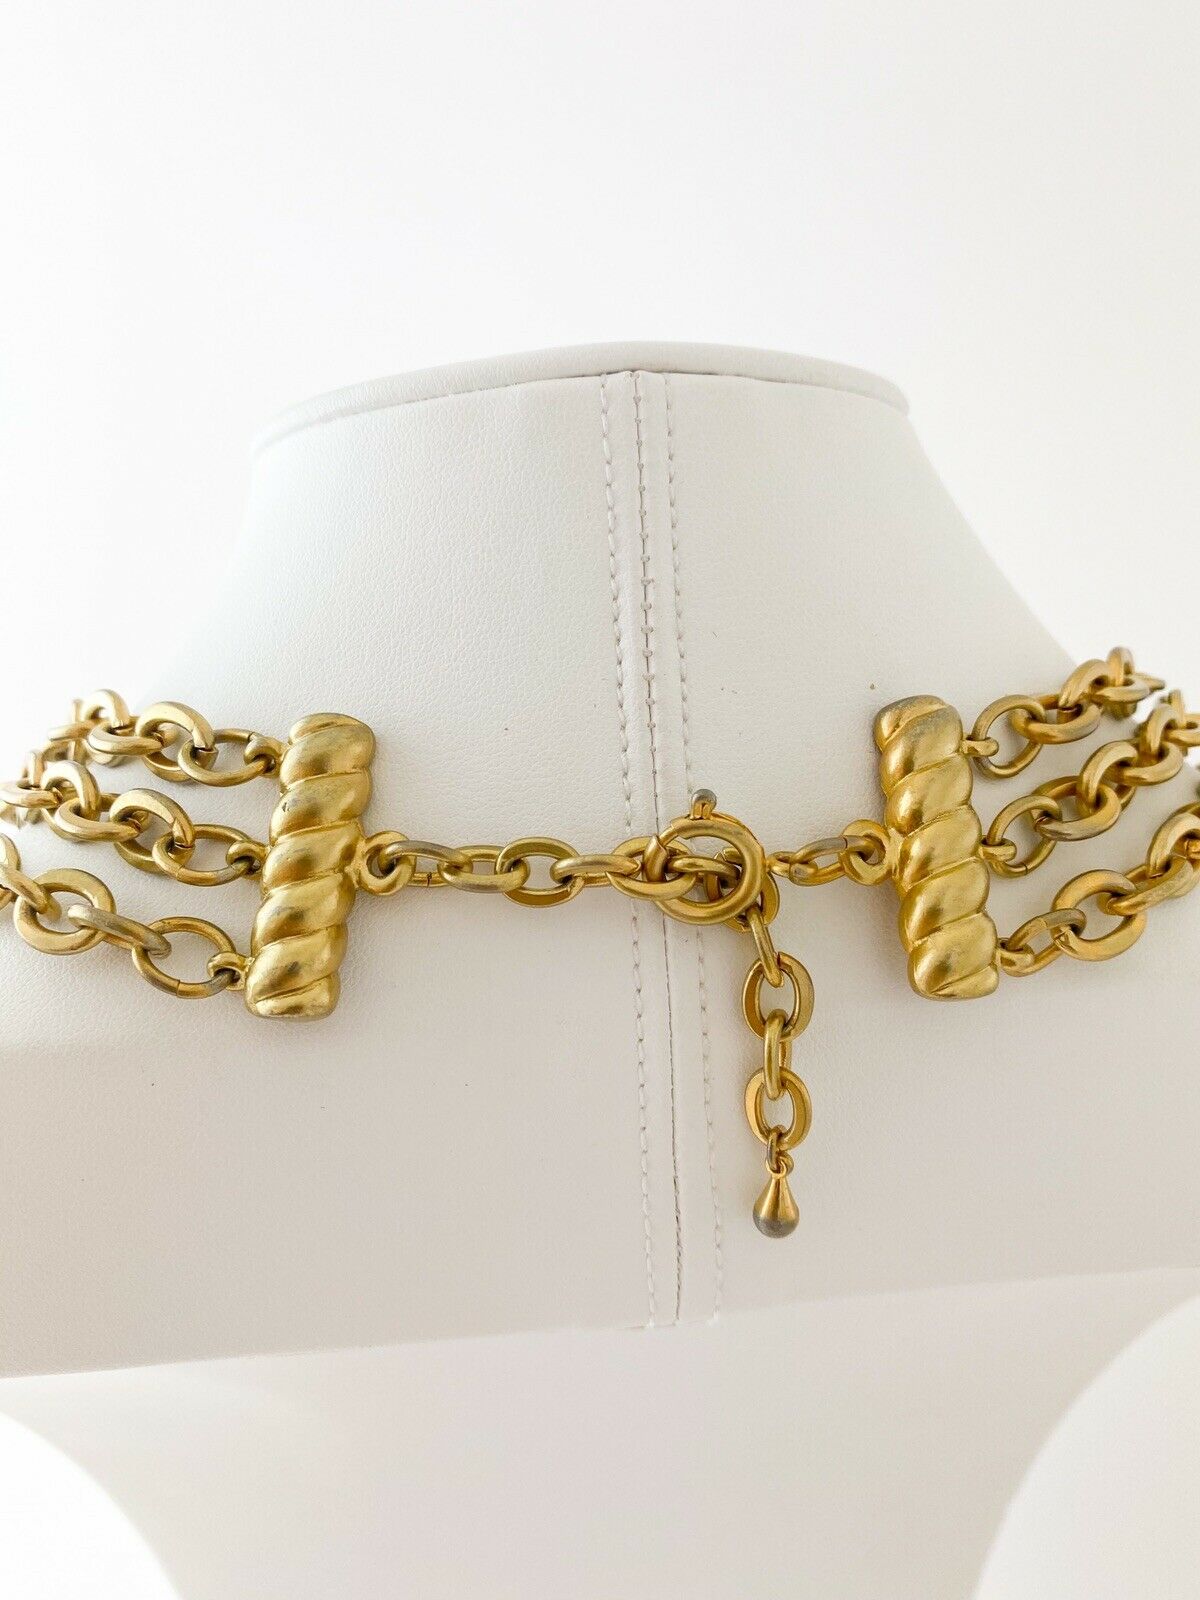 【SOLD OUT】Karl Lagerfeld Vintage Gold Tone 3 Row Chain Necklace Extra Large